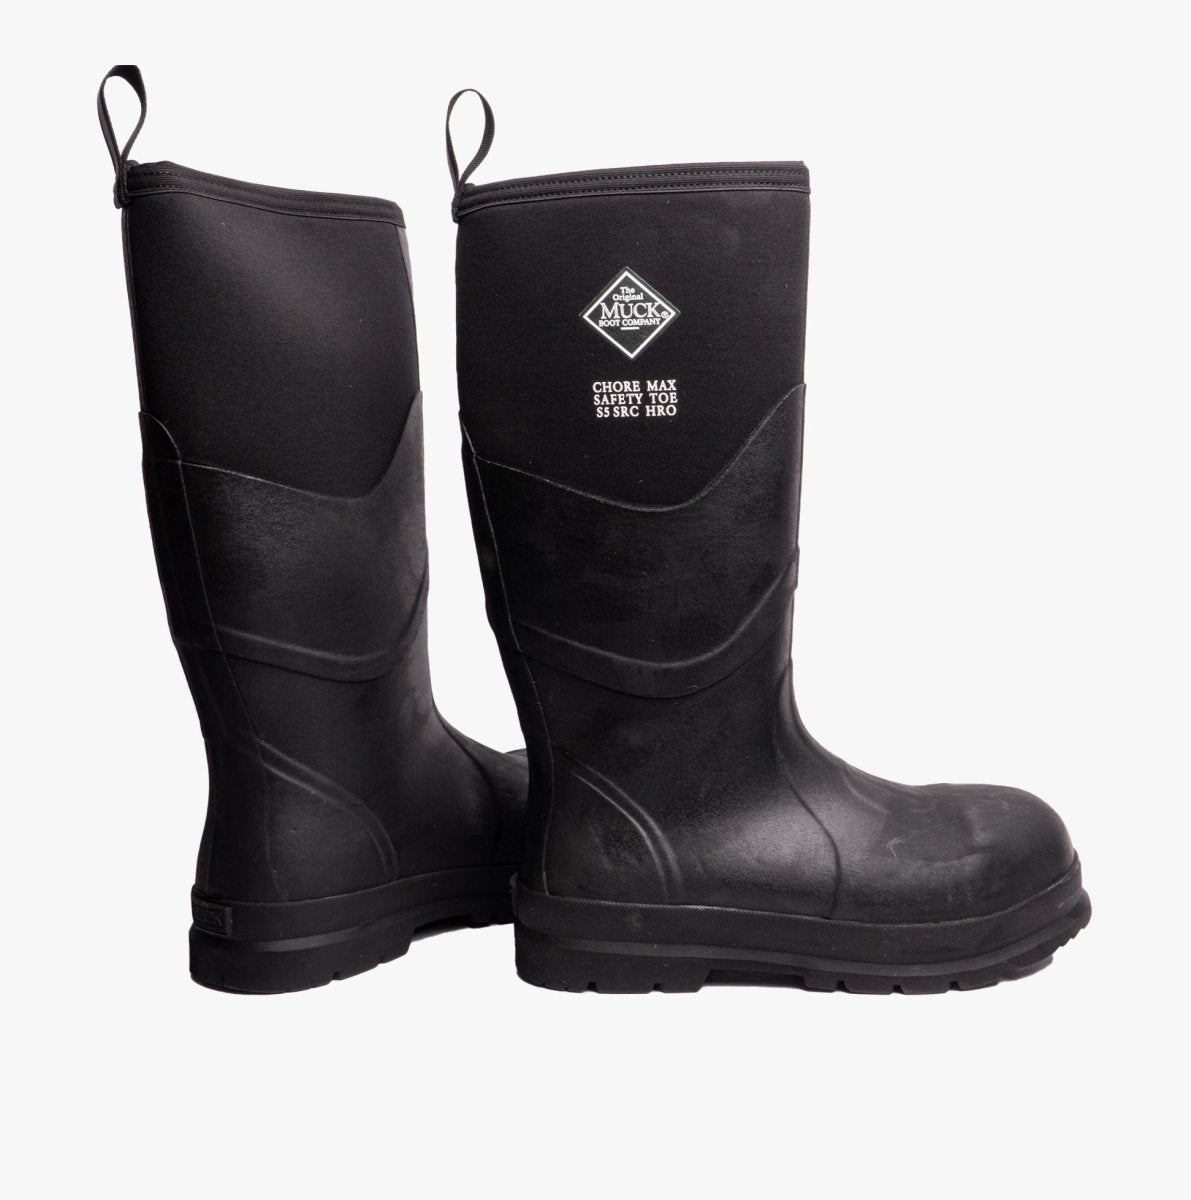 Muck Boots CHORE MAX S5 Unisex Rubber Safety Wellington Boots Black 29155 - 49267 - 02 | STB.co.uk